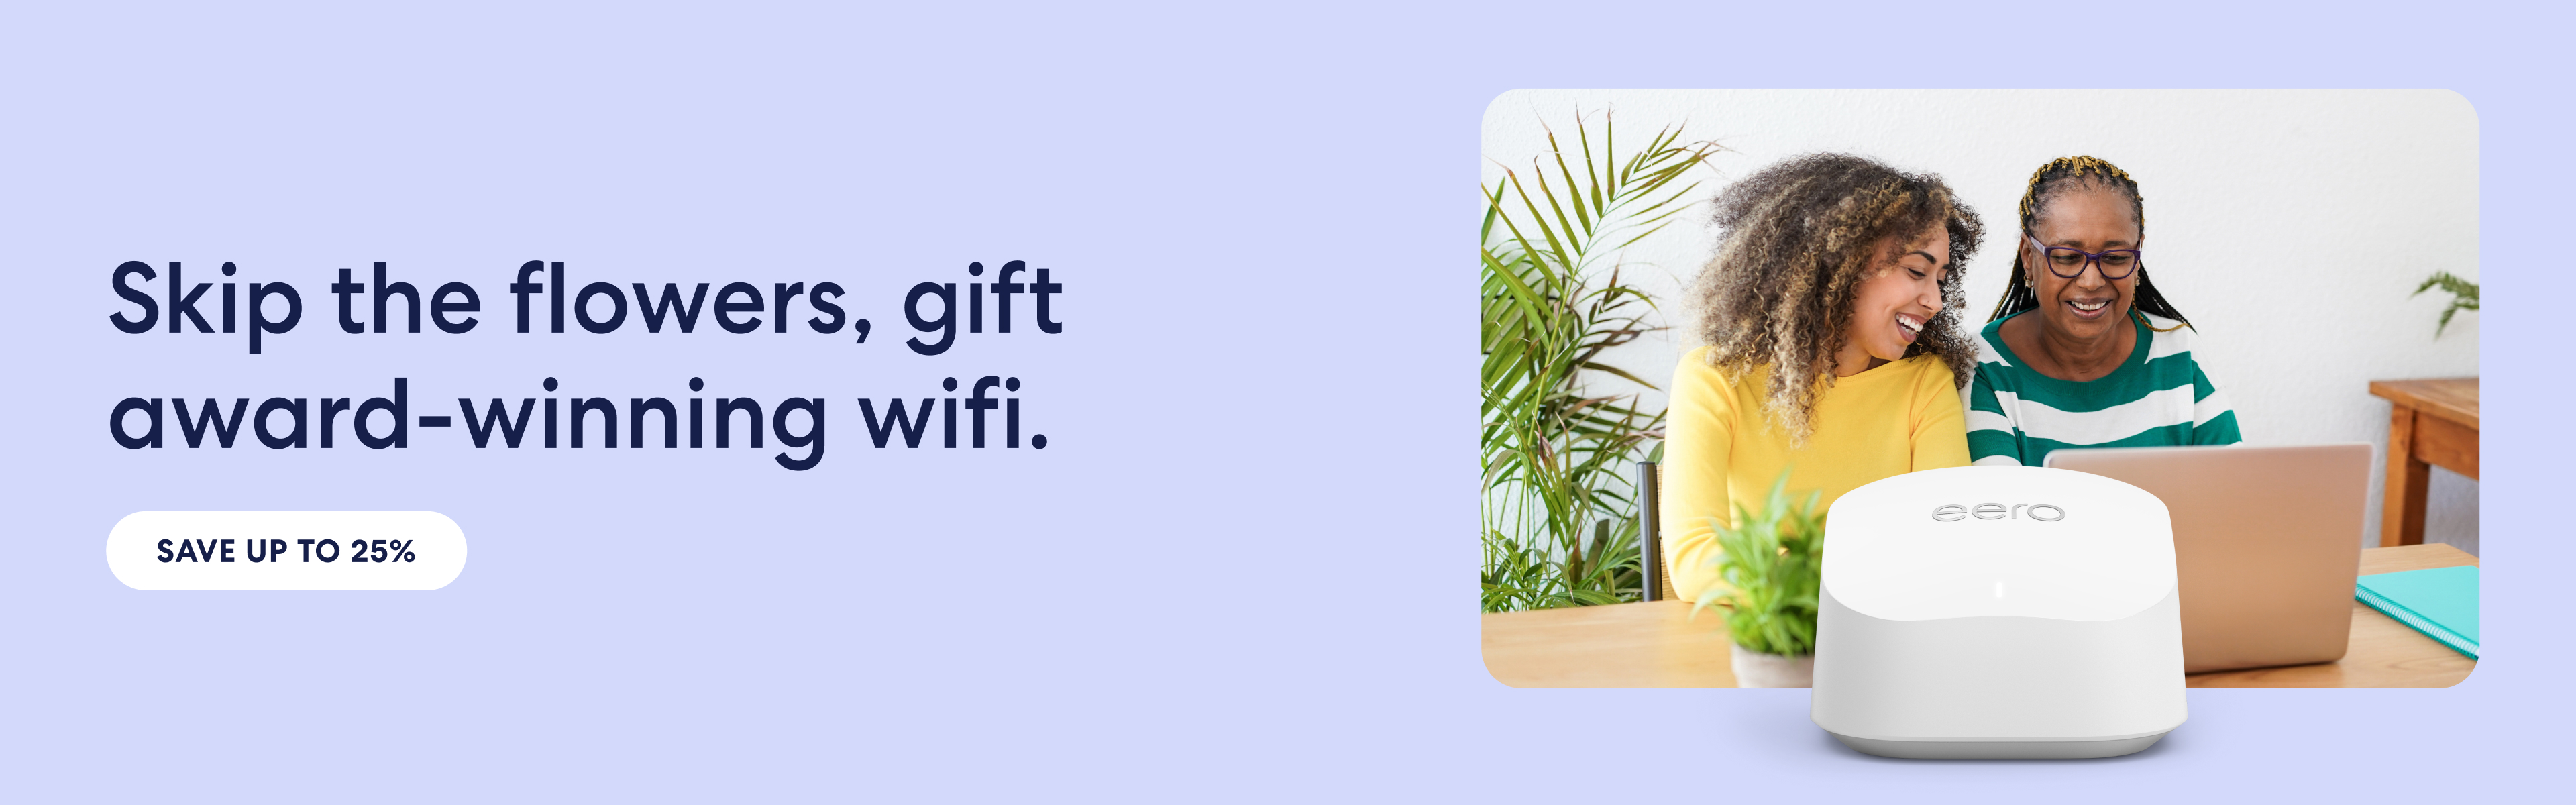 This Mother's Day, skip the flowers, gift award-winning eero wifi. Save 25% now.